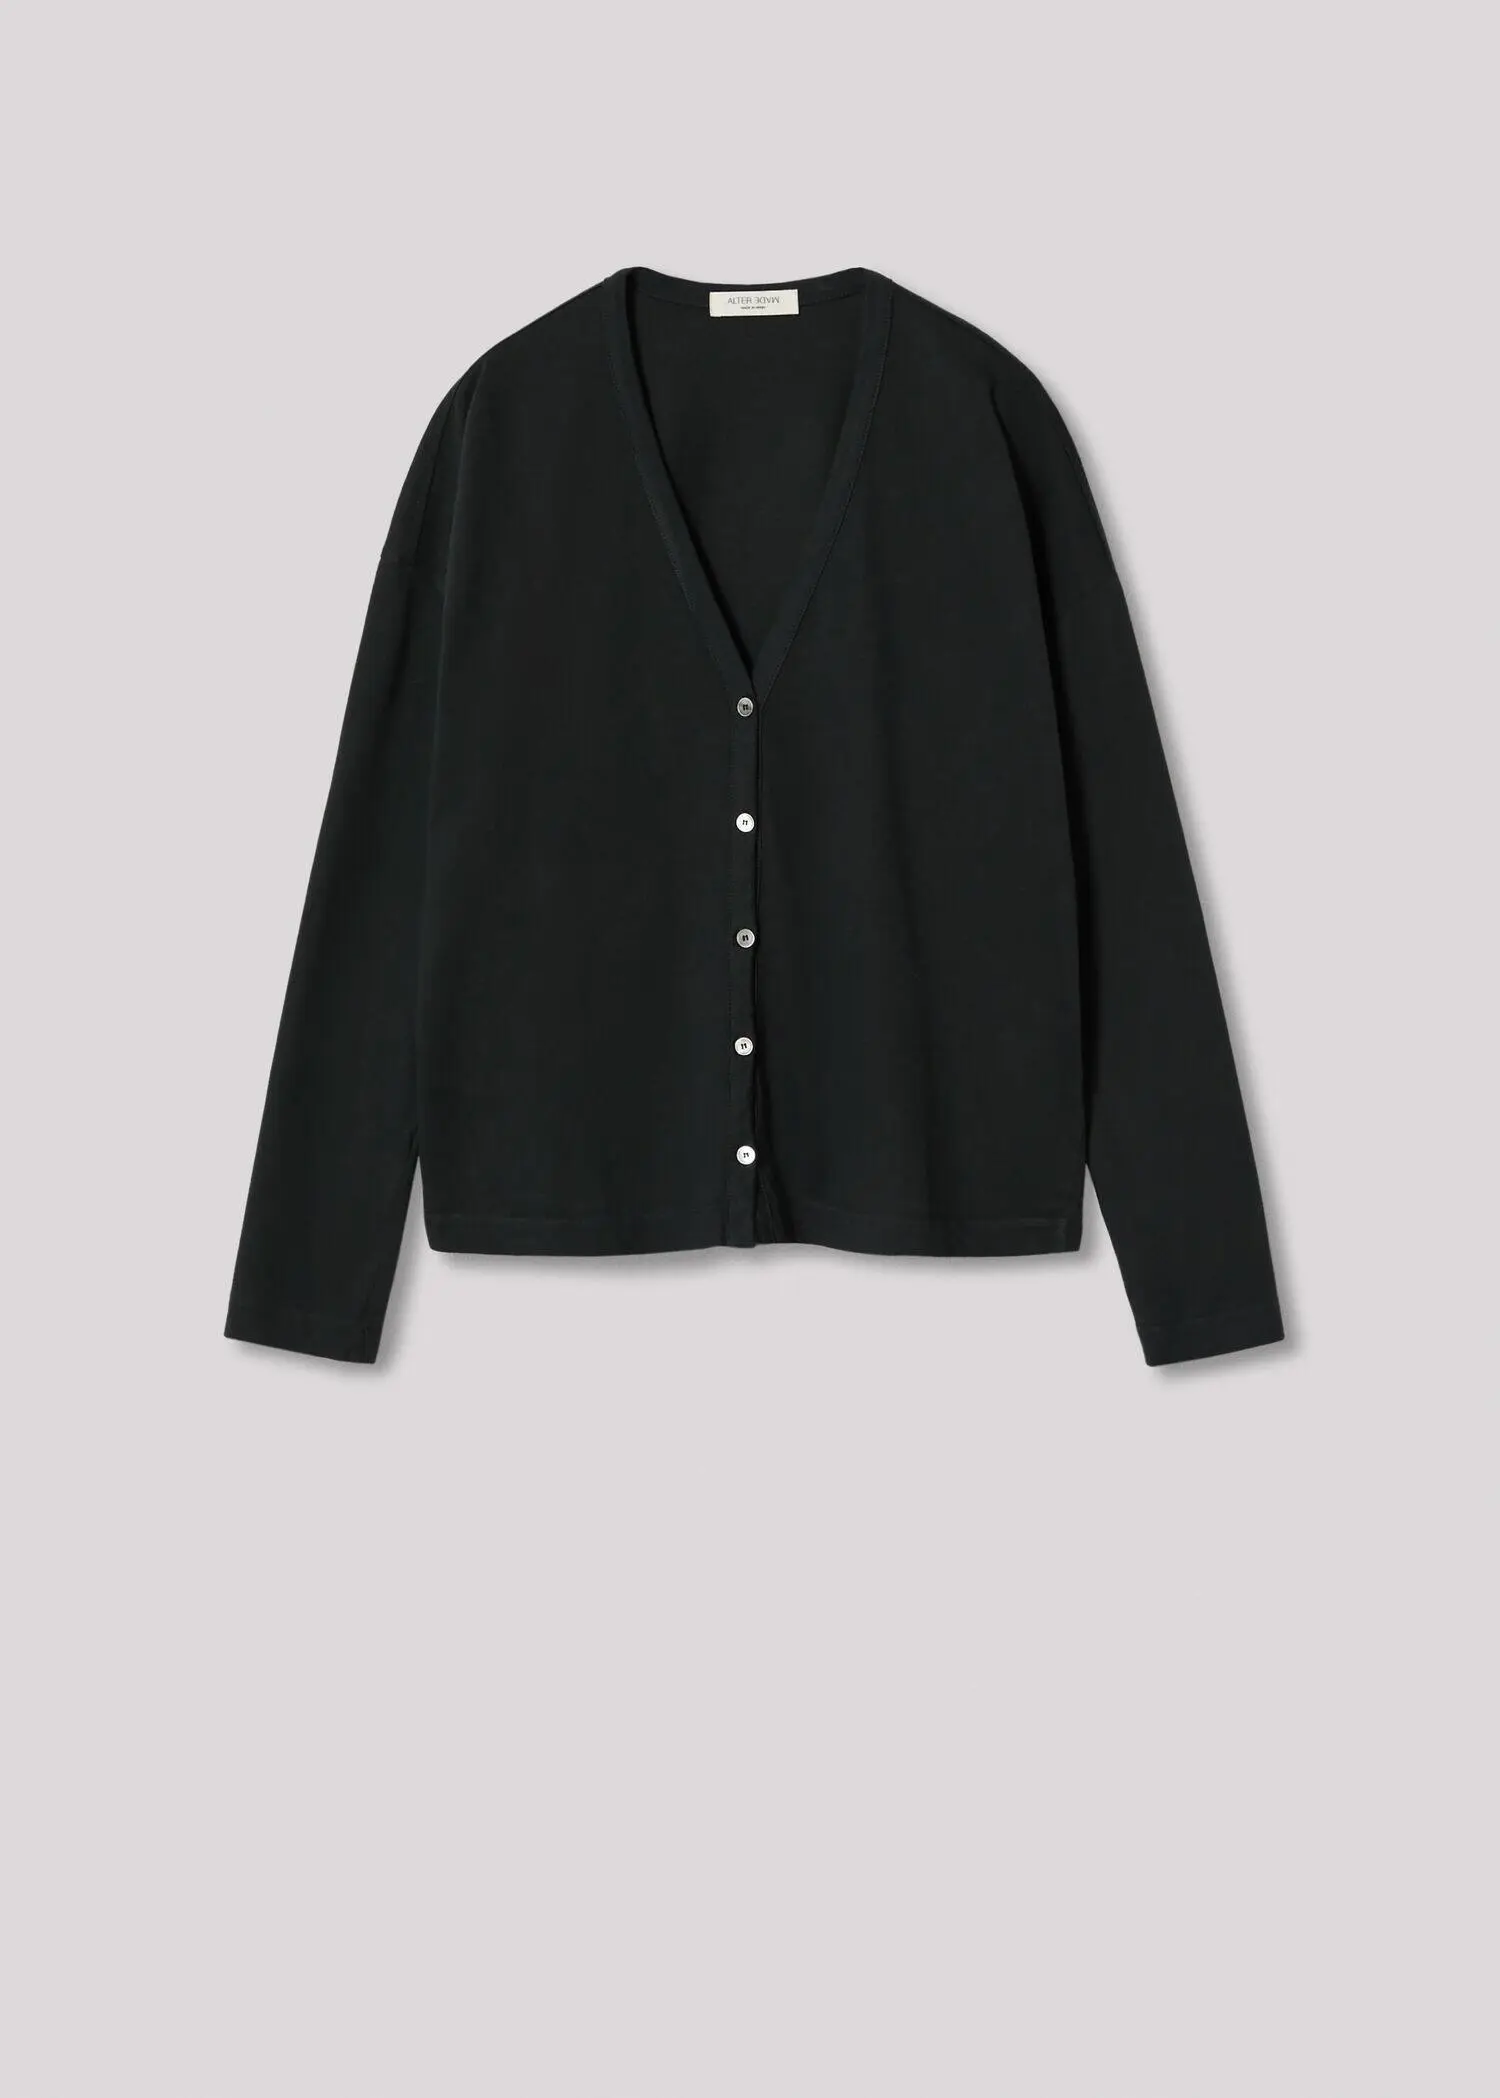 Mango  Hecho en España. a woman wearing a black cardigan with buttons down the front 